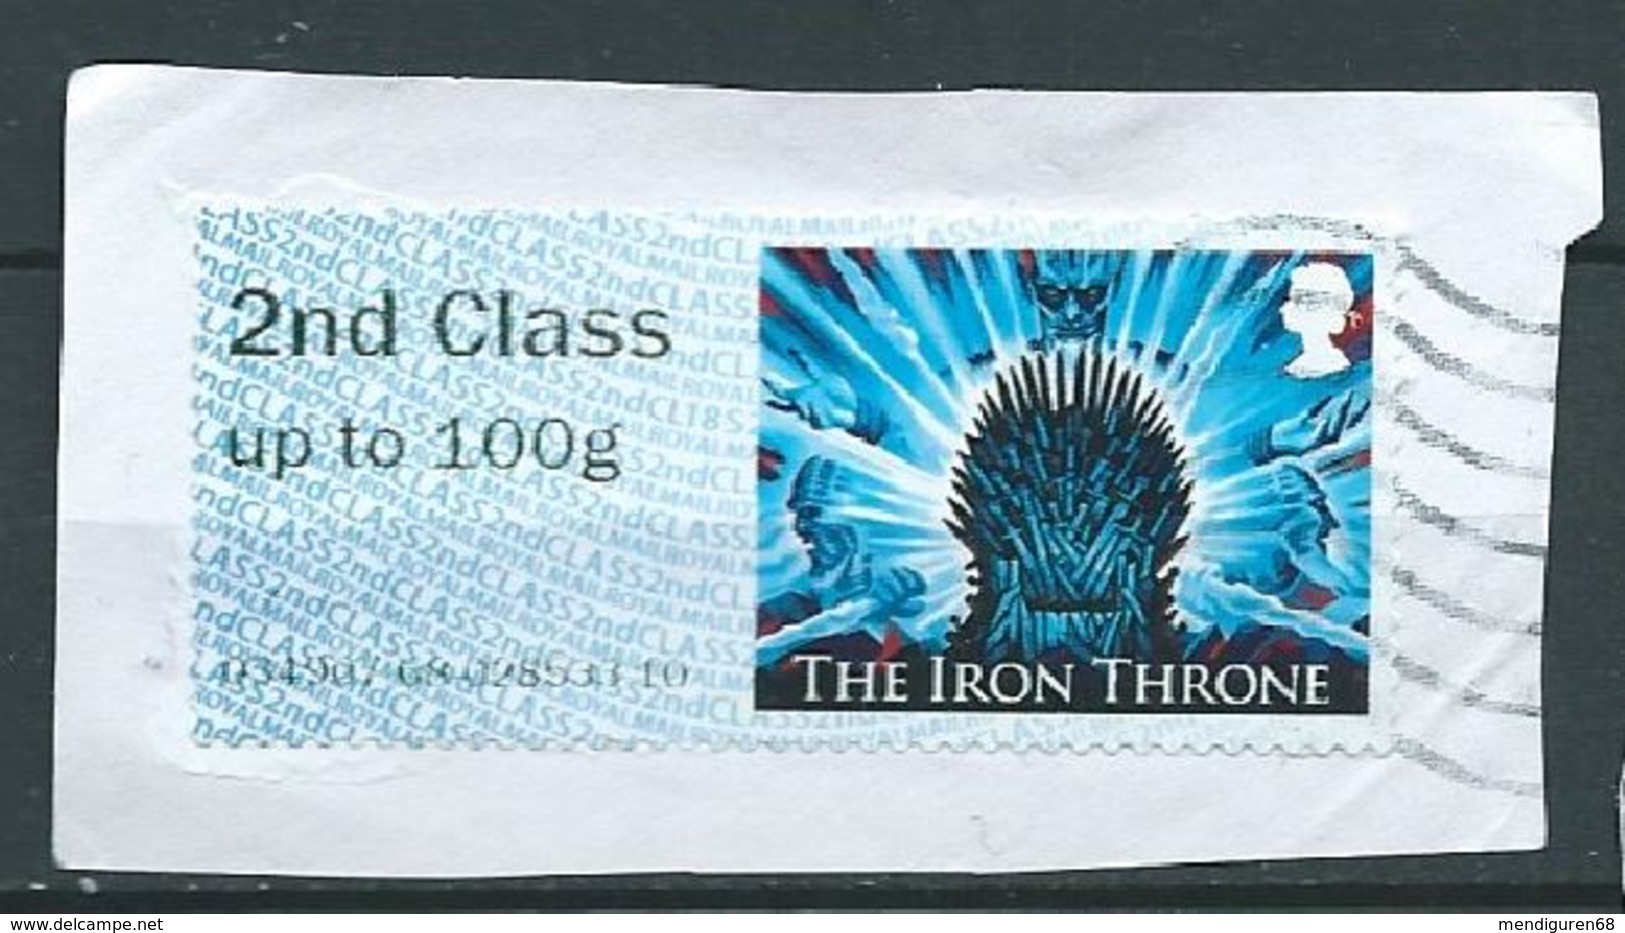 GROSSBRITANNIEN GRANDE BRETAGNE POST & GO 2018 GAME OF THRONES: HE IRON THRONE ICE 2Nd Class Up To 100g SG FS199 MI AT13 - Post & Go (distributeurs)